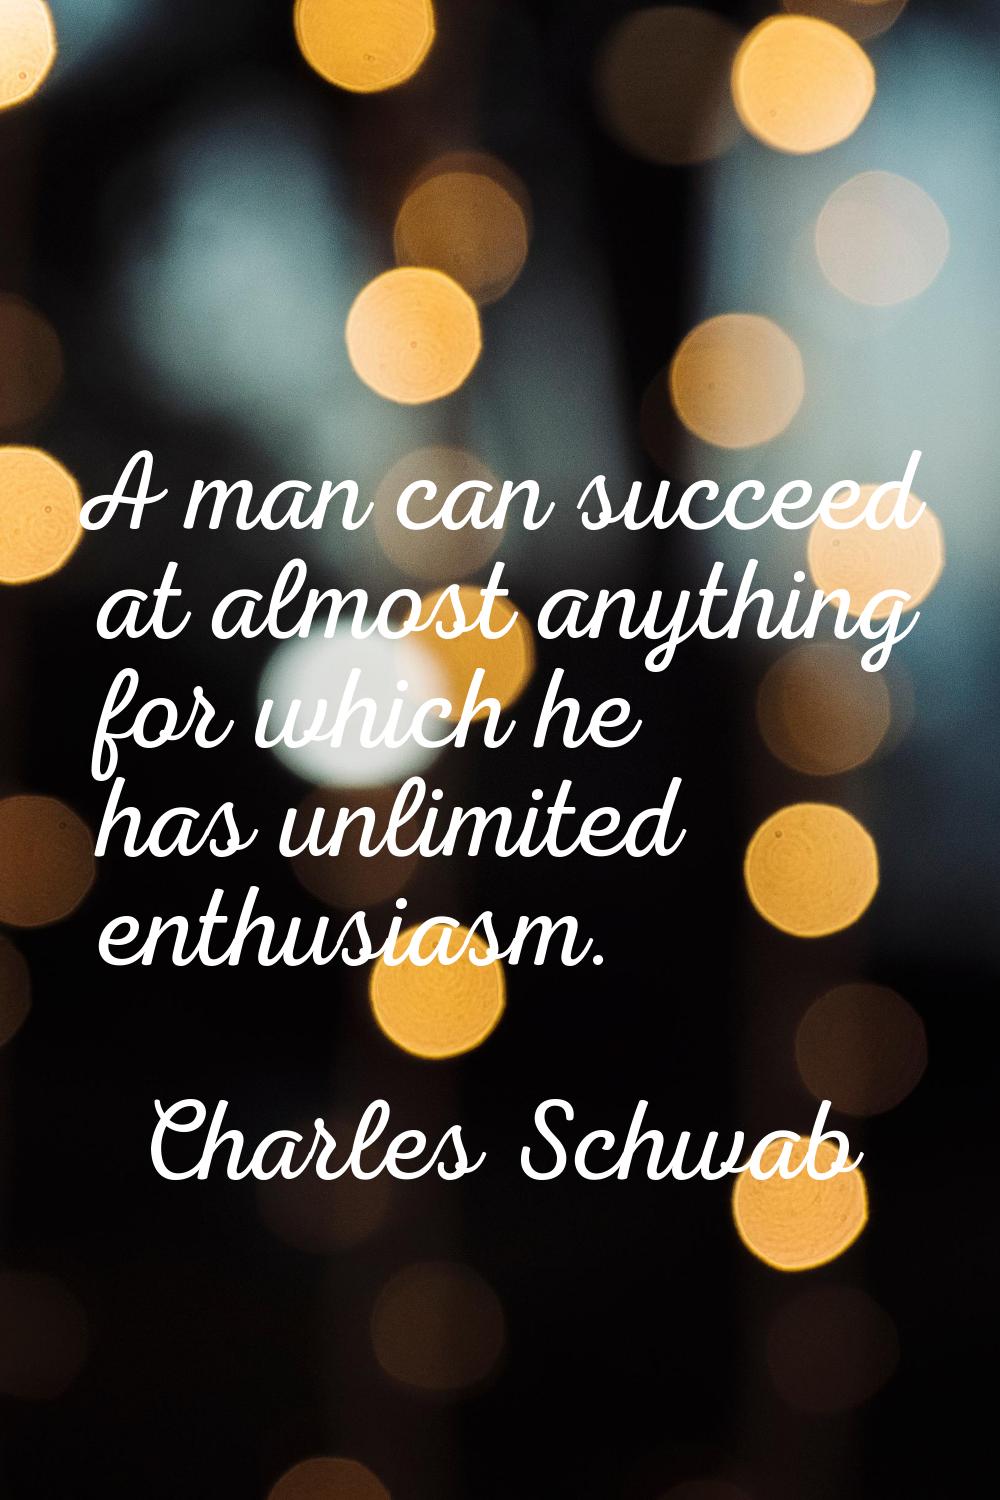 A man can succeed at almost anything for which he has unlimited enthusiasm.